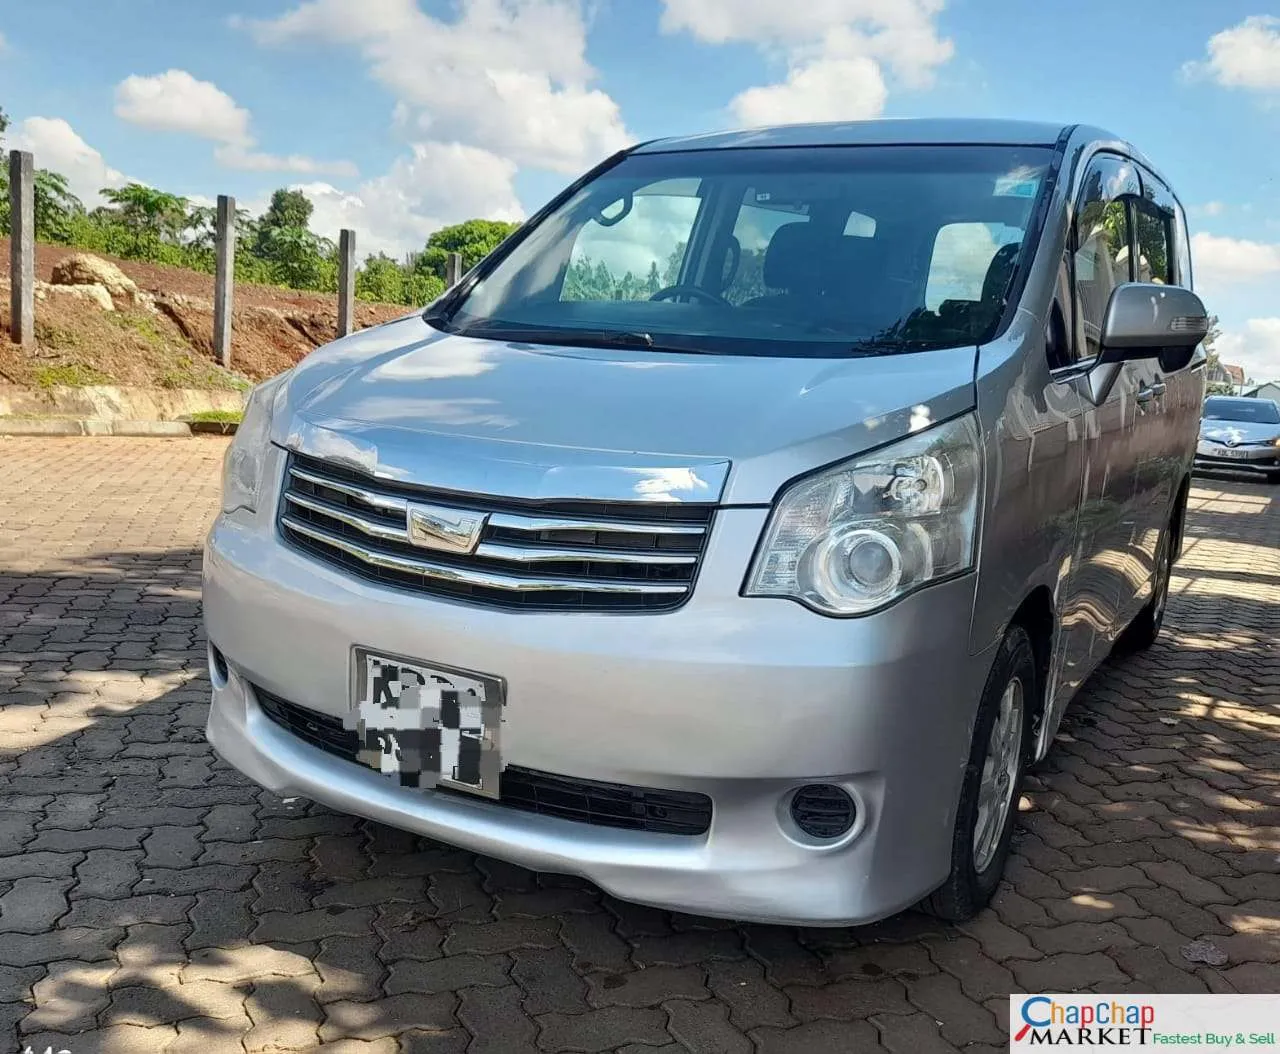 Toyota NOAH kenya 🔥 You Pay 30% Deposit Trade in OK Toyota Noah for sale in kenya hire purchase installments EXCLUSIVE